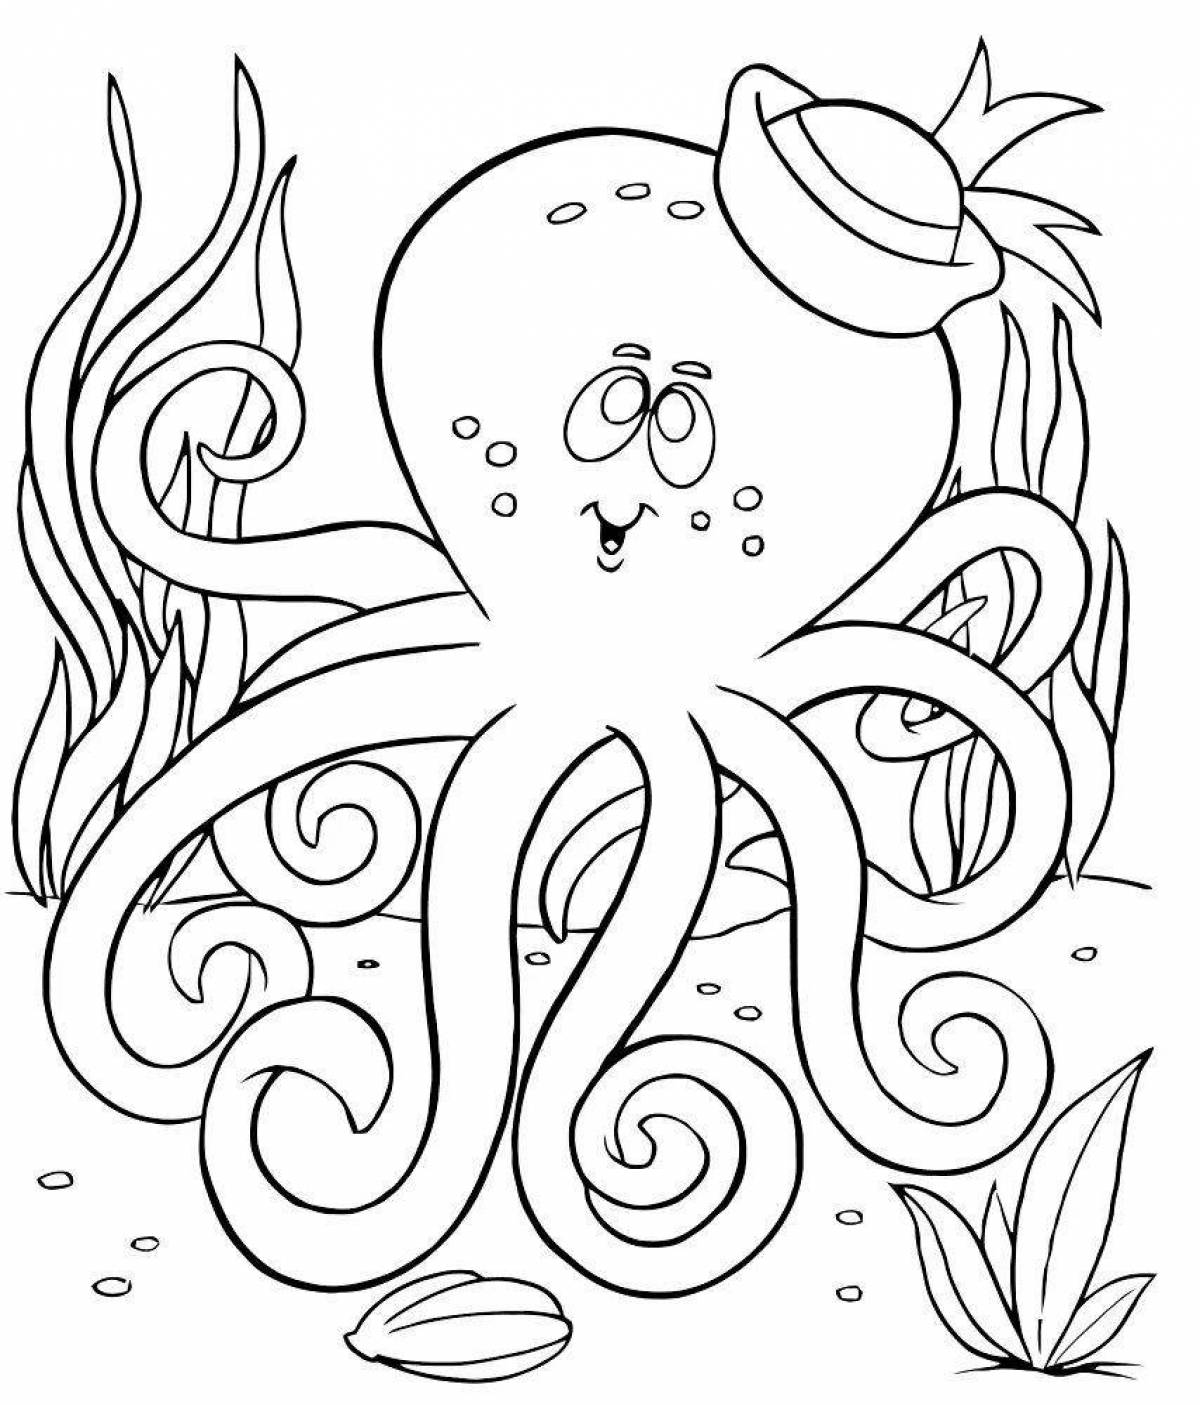 Great octopus coloring book for kids